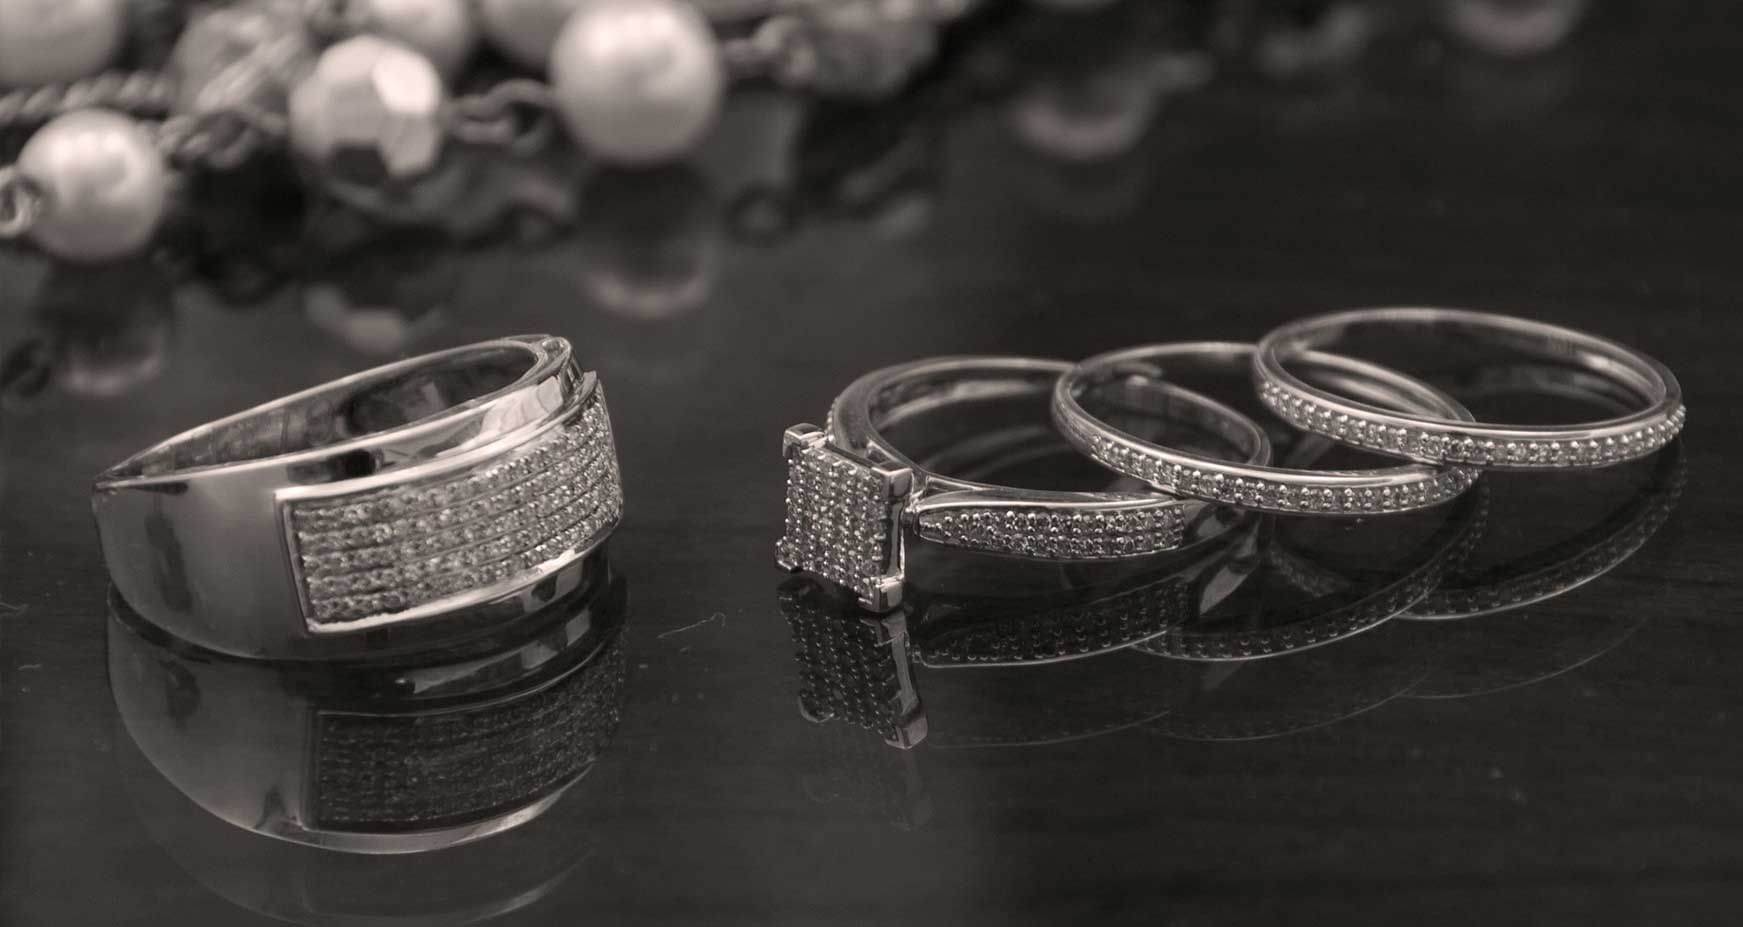 Black & white close-up image of wedding ring bands at Courtleigh Hotel & Suites